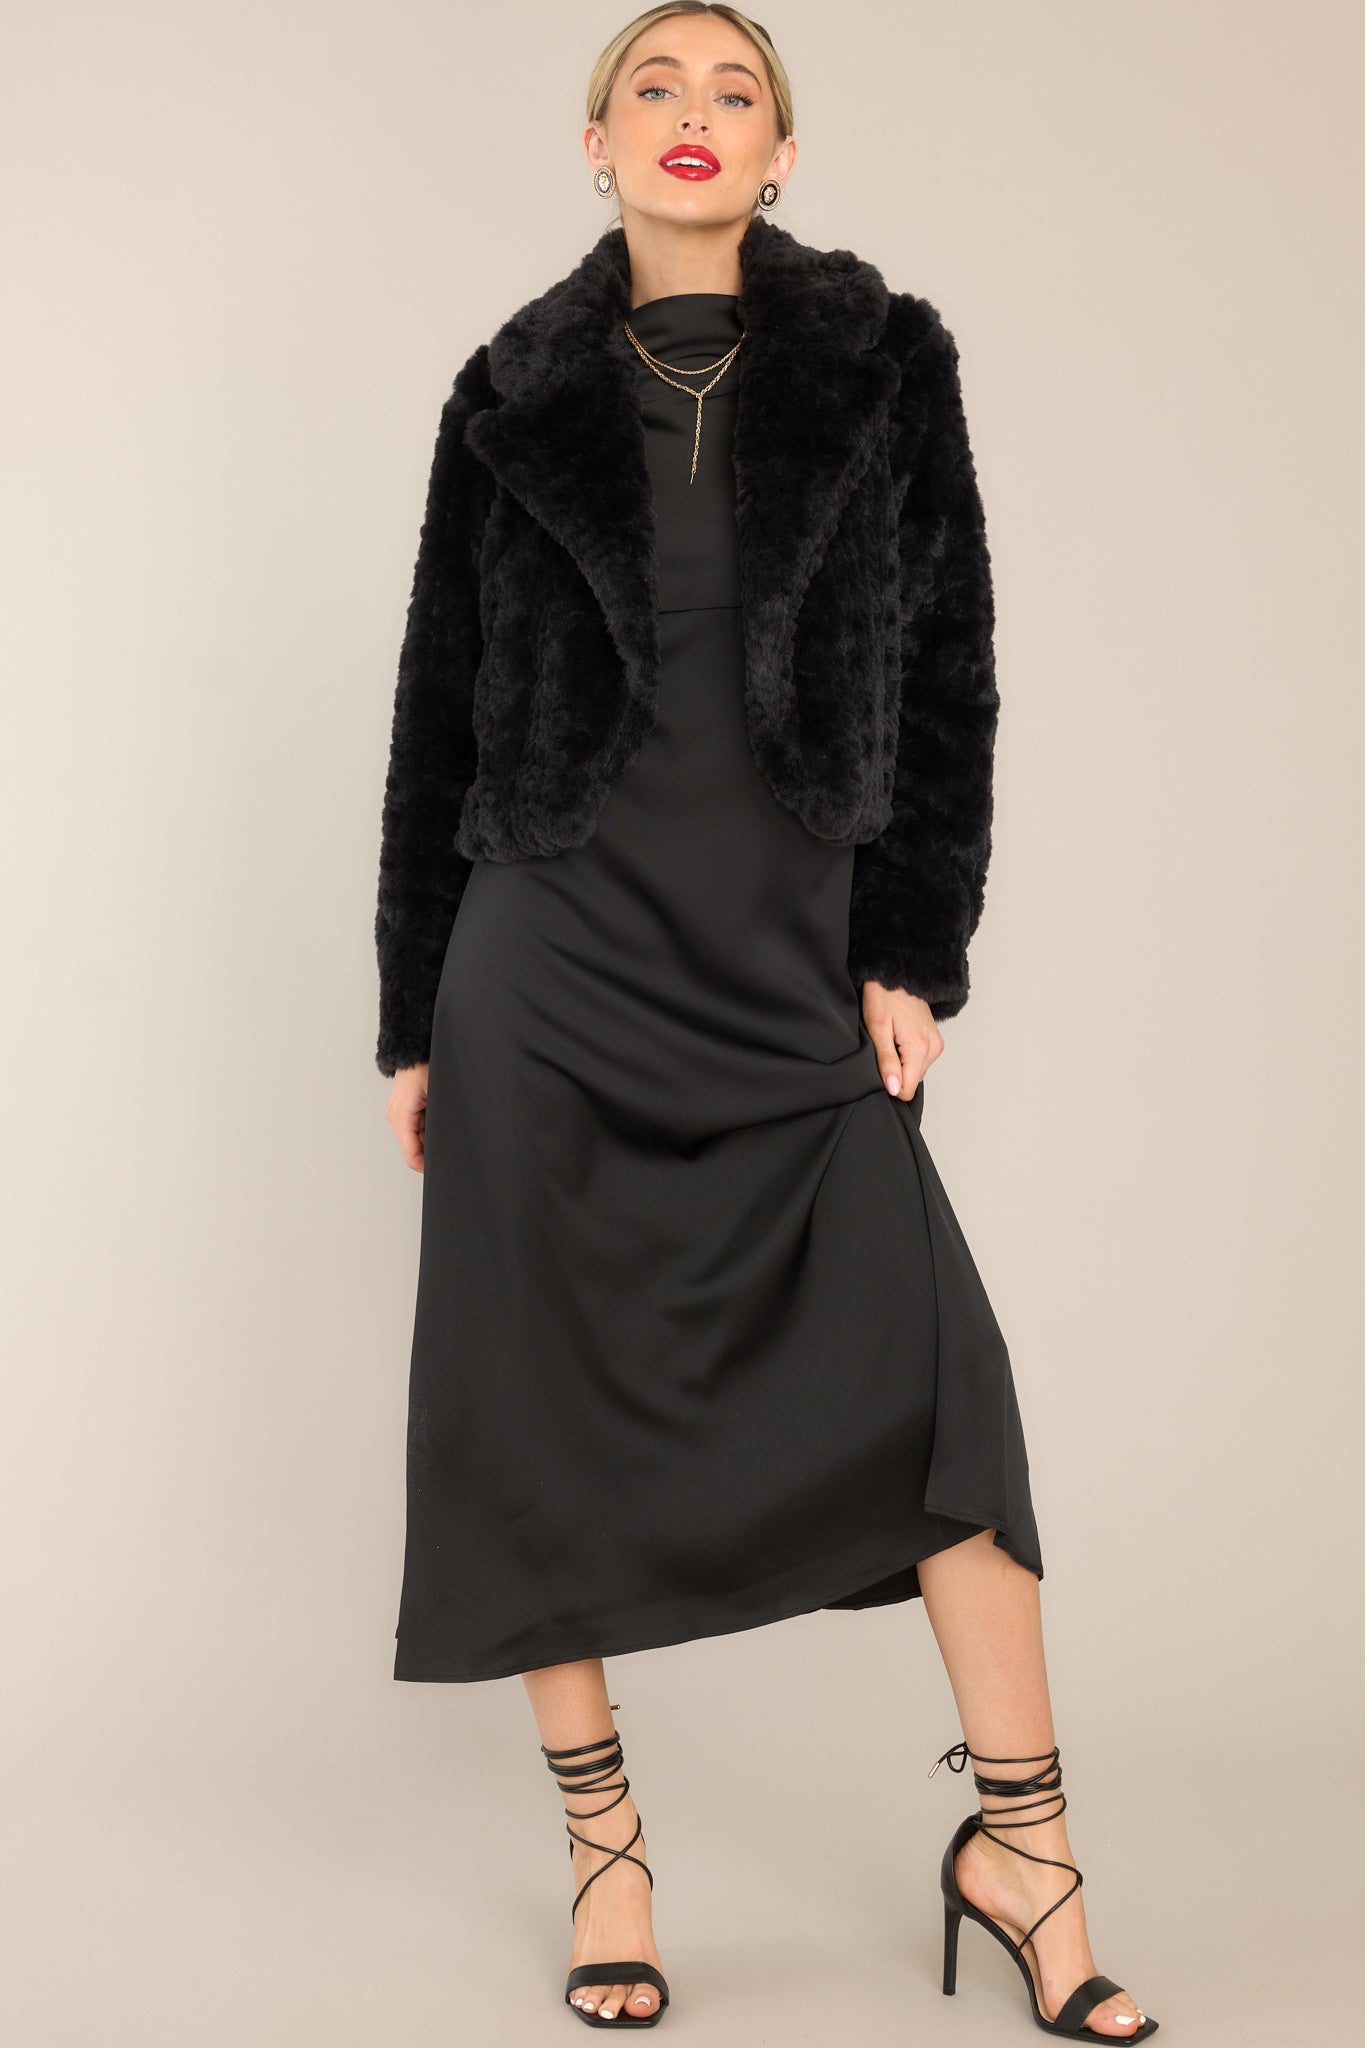 Full body view of this faux fur jacket that features a folded collar.